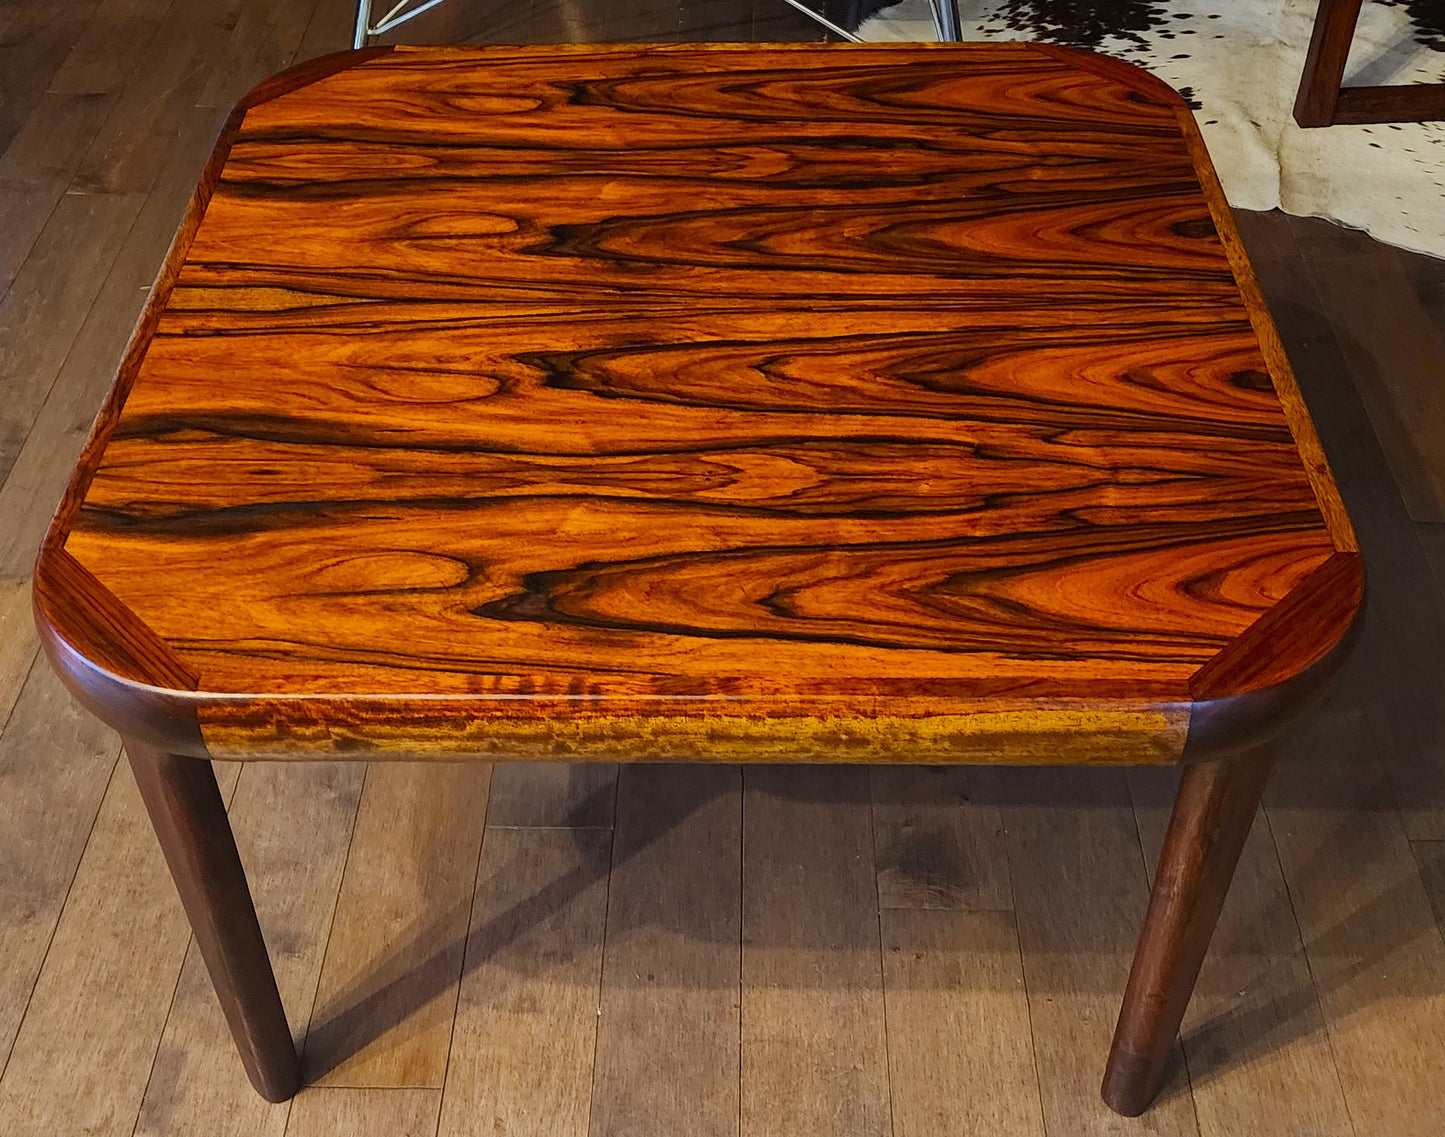 REFINISHED Danish Mid Century Modern Rosewood Coffee or Accent Table